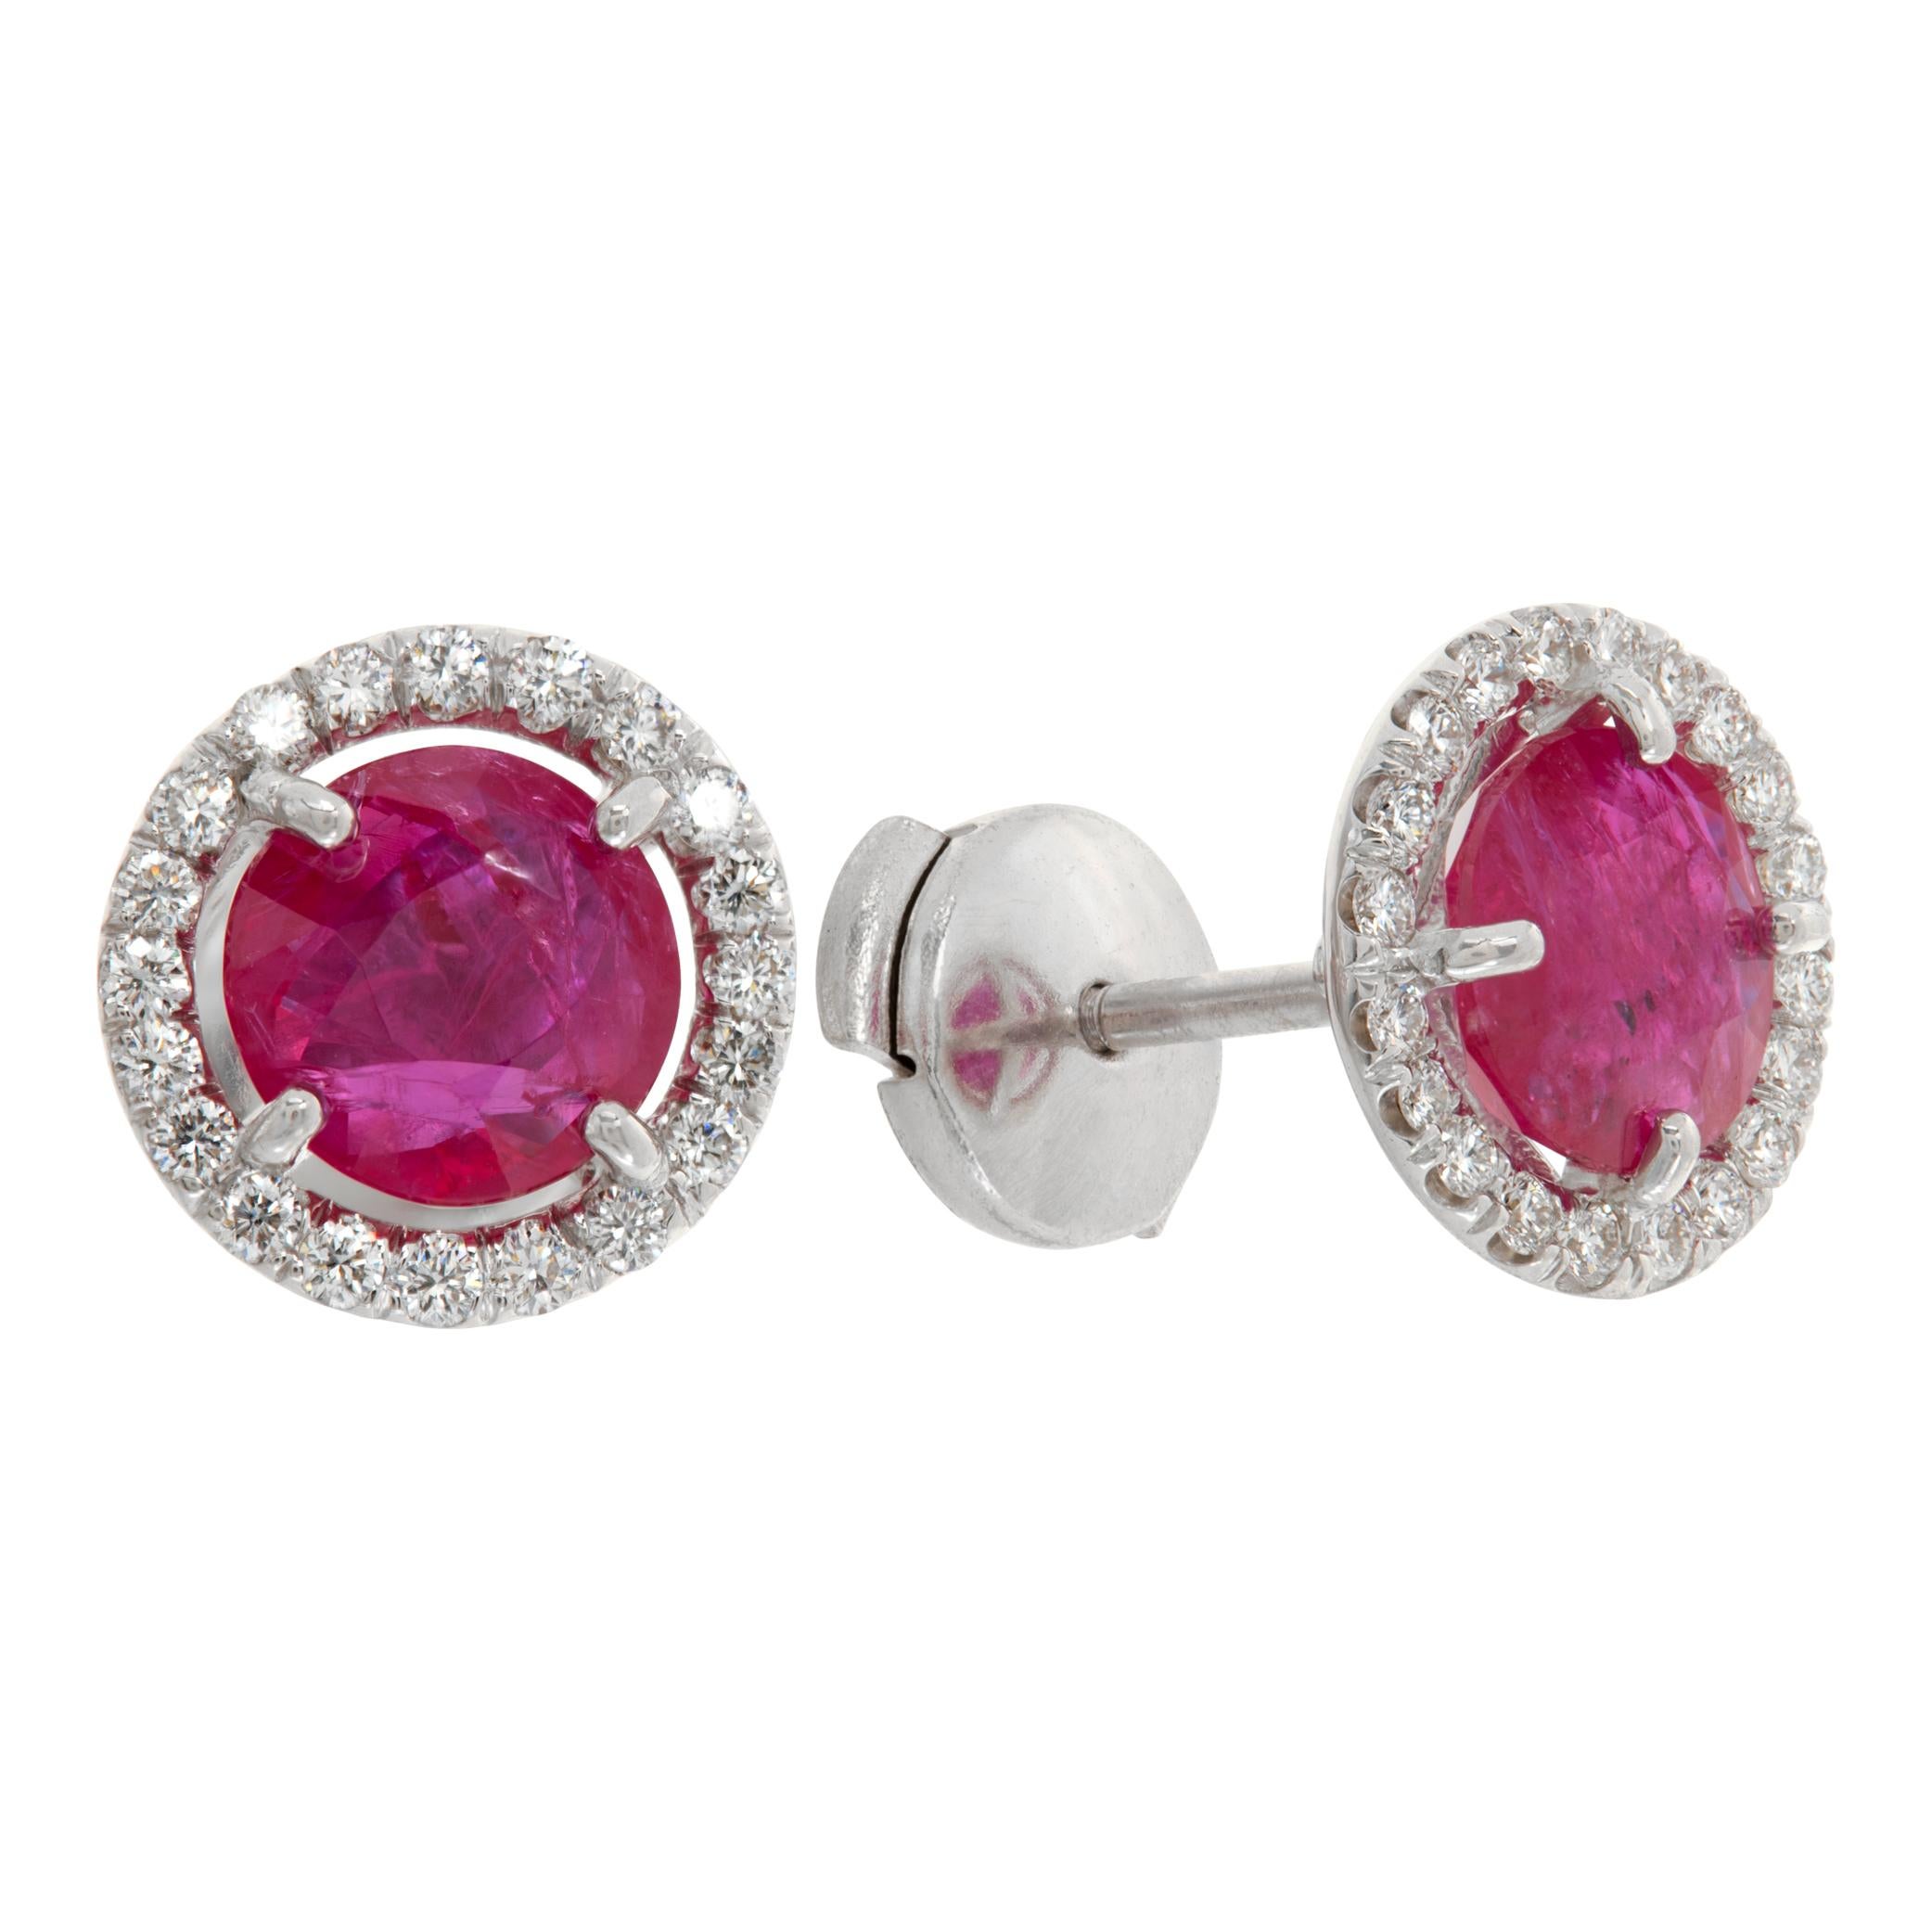 Round Brilliant cut rubies studs, in 18K white gold diamonds Halo setting. Round brilliant cut african rubies total approx. weight: 2.82, Round brilliant cut diamonds total approx. weight: 0.35 carat, estimate: H Color, SI Clarity. 10 mmm diameter.